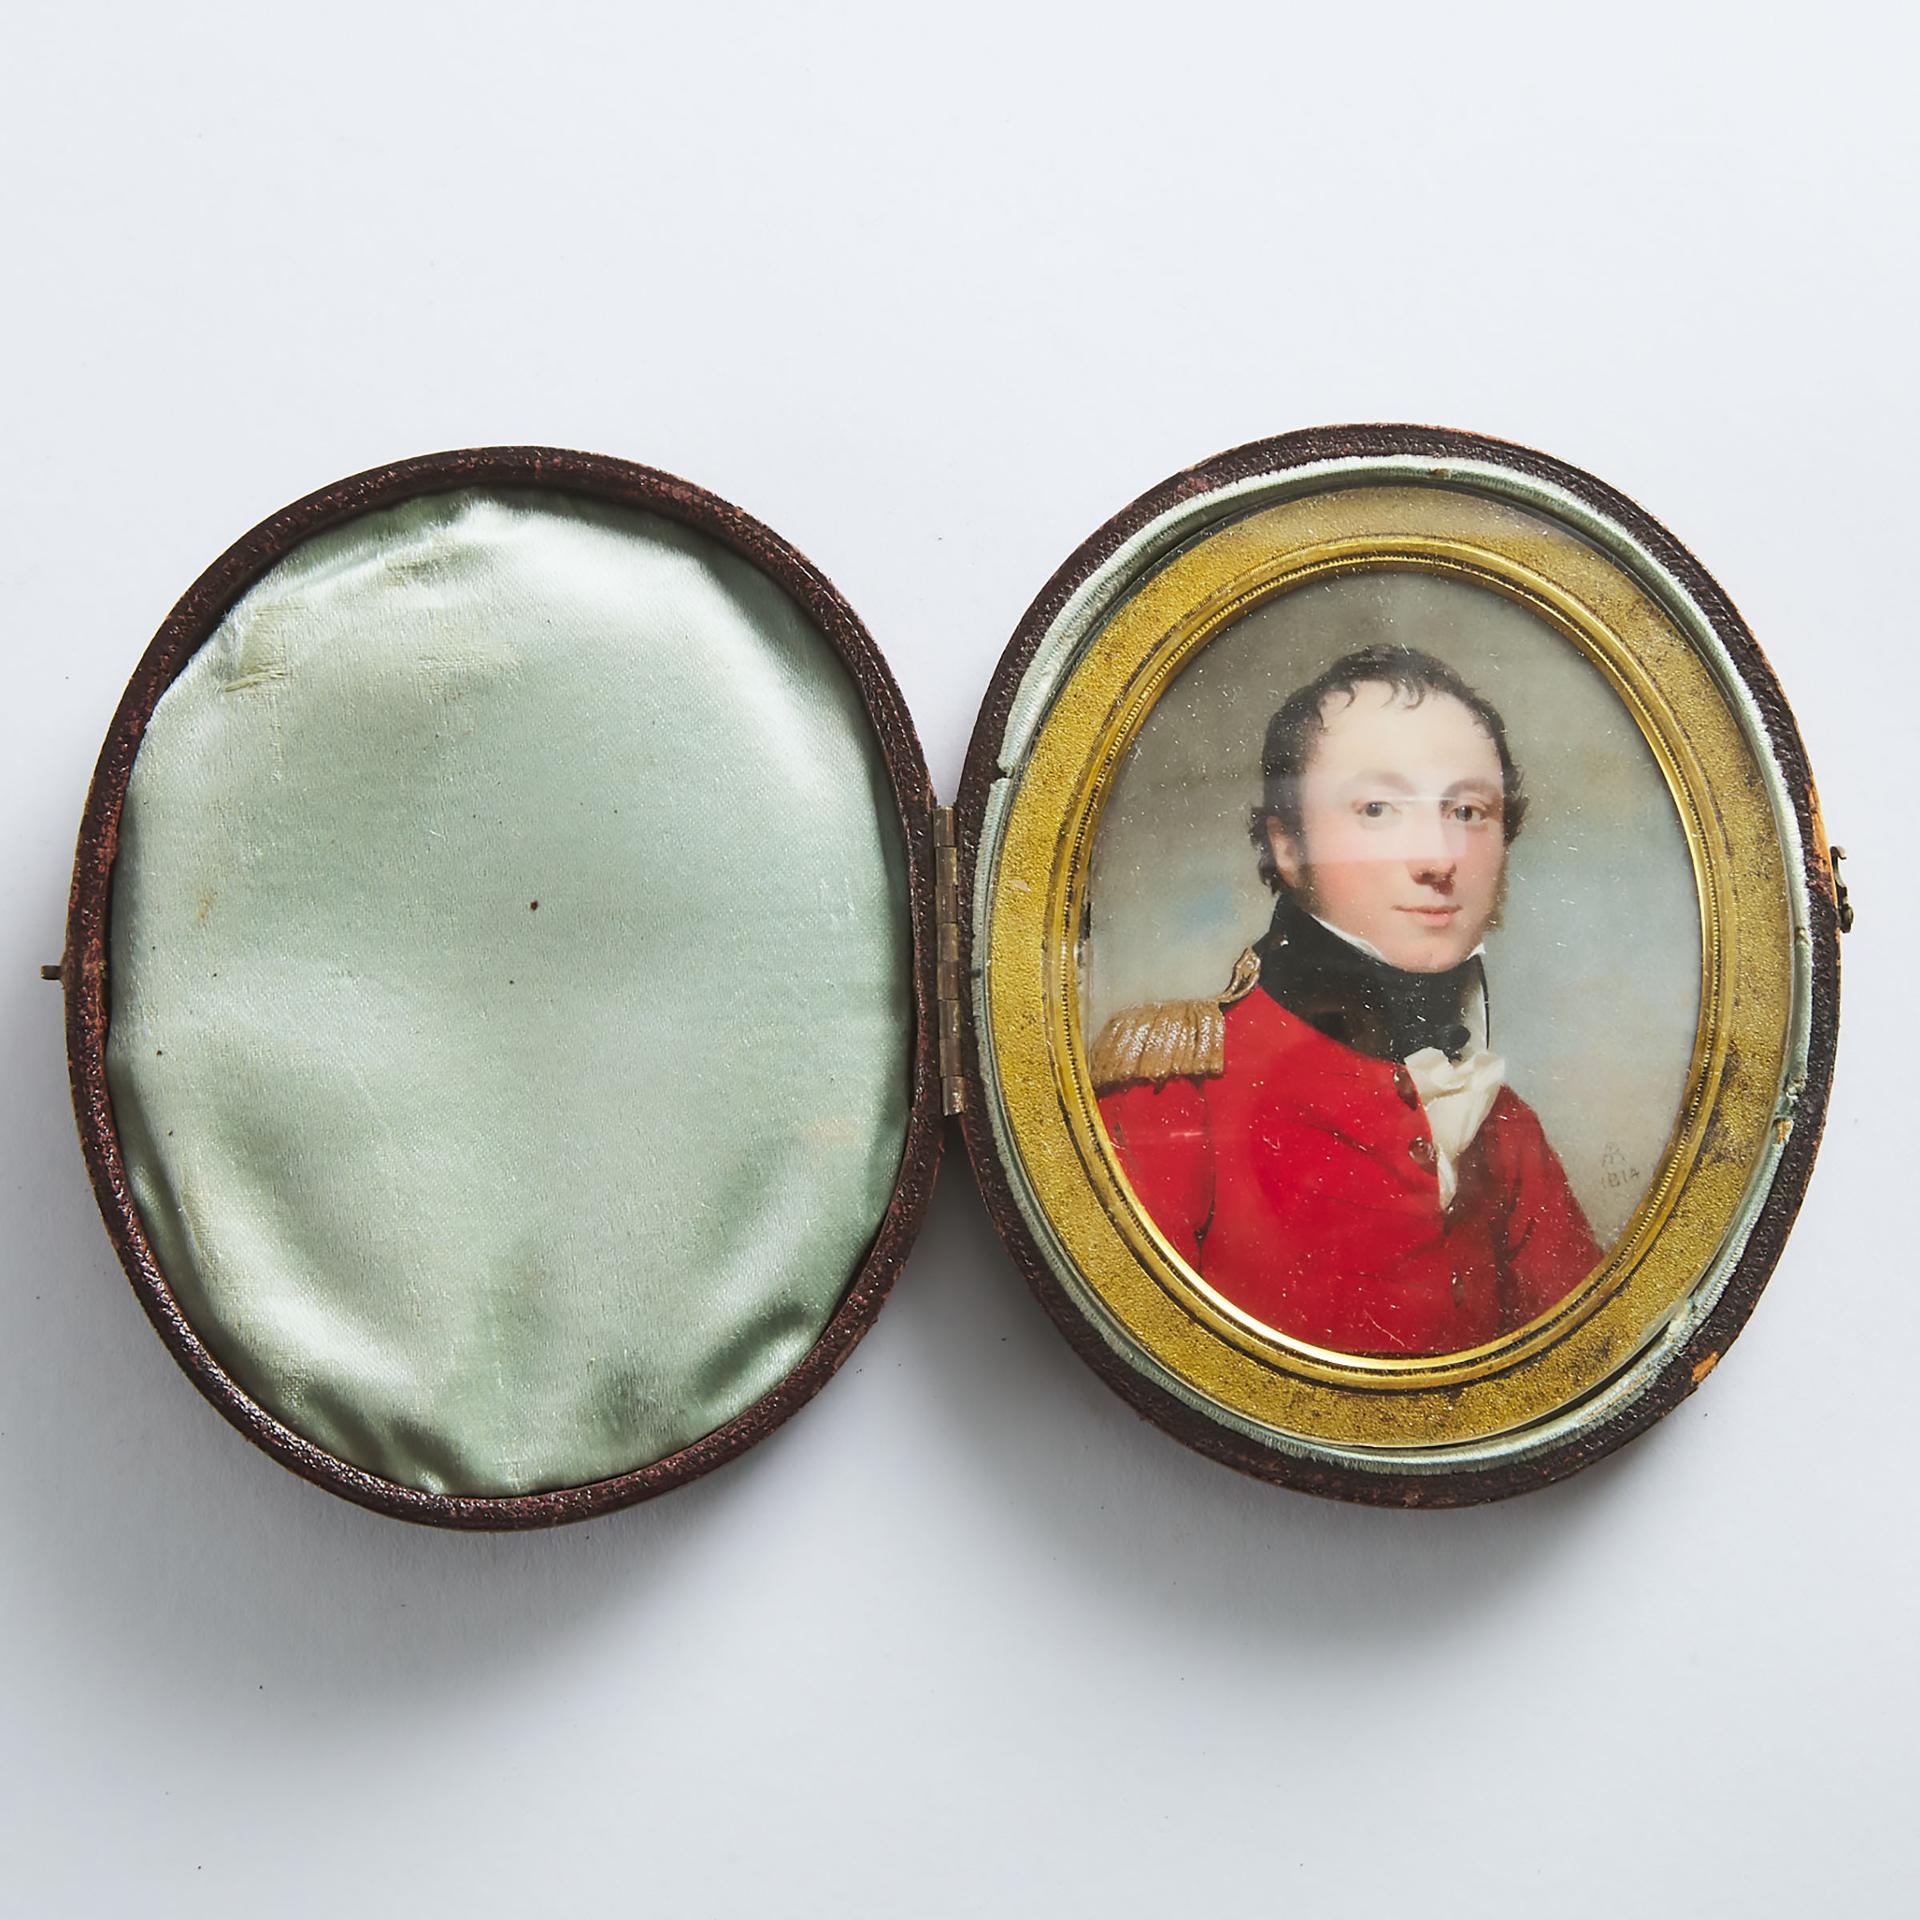 Andrew Robertson - Portrait Miniature Of An Officer, 1814